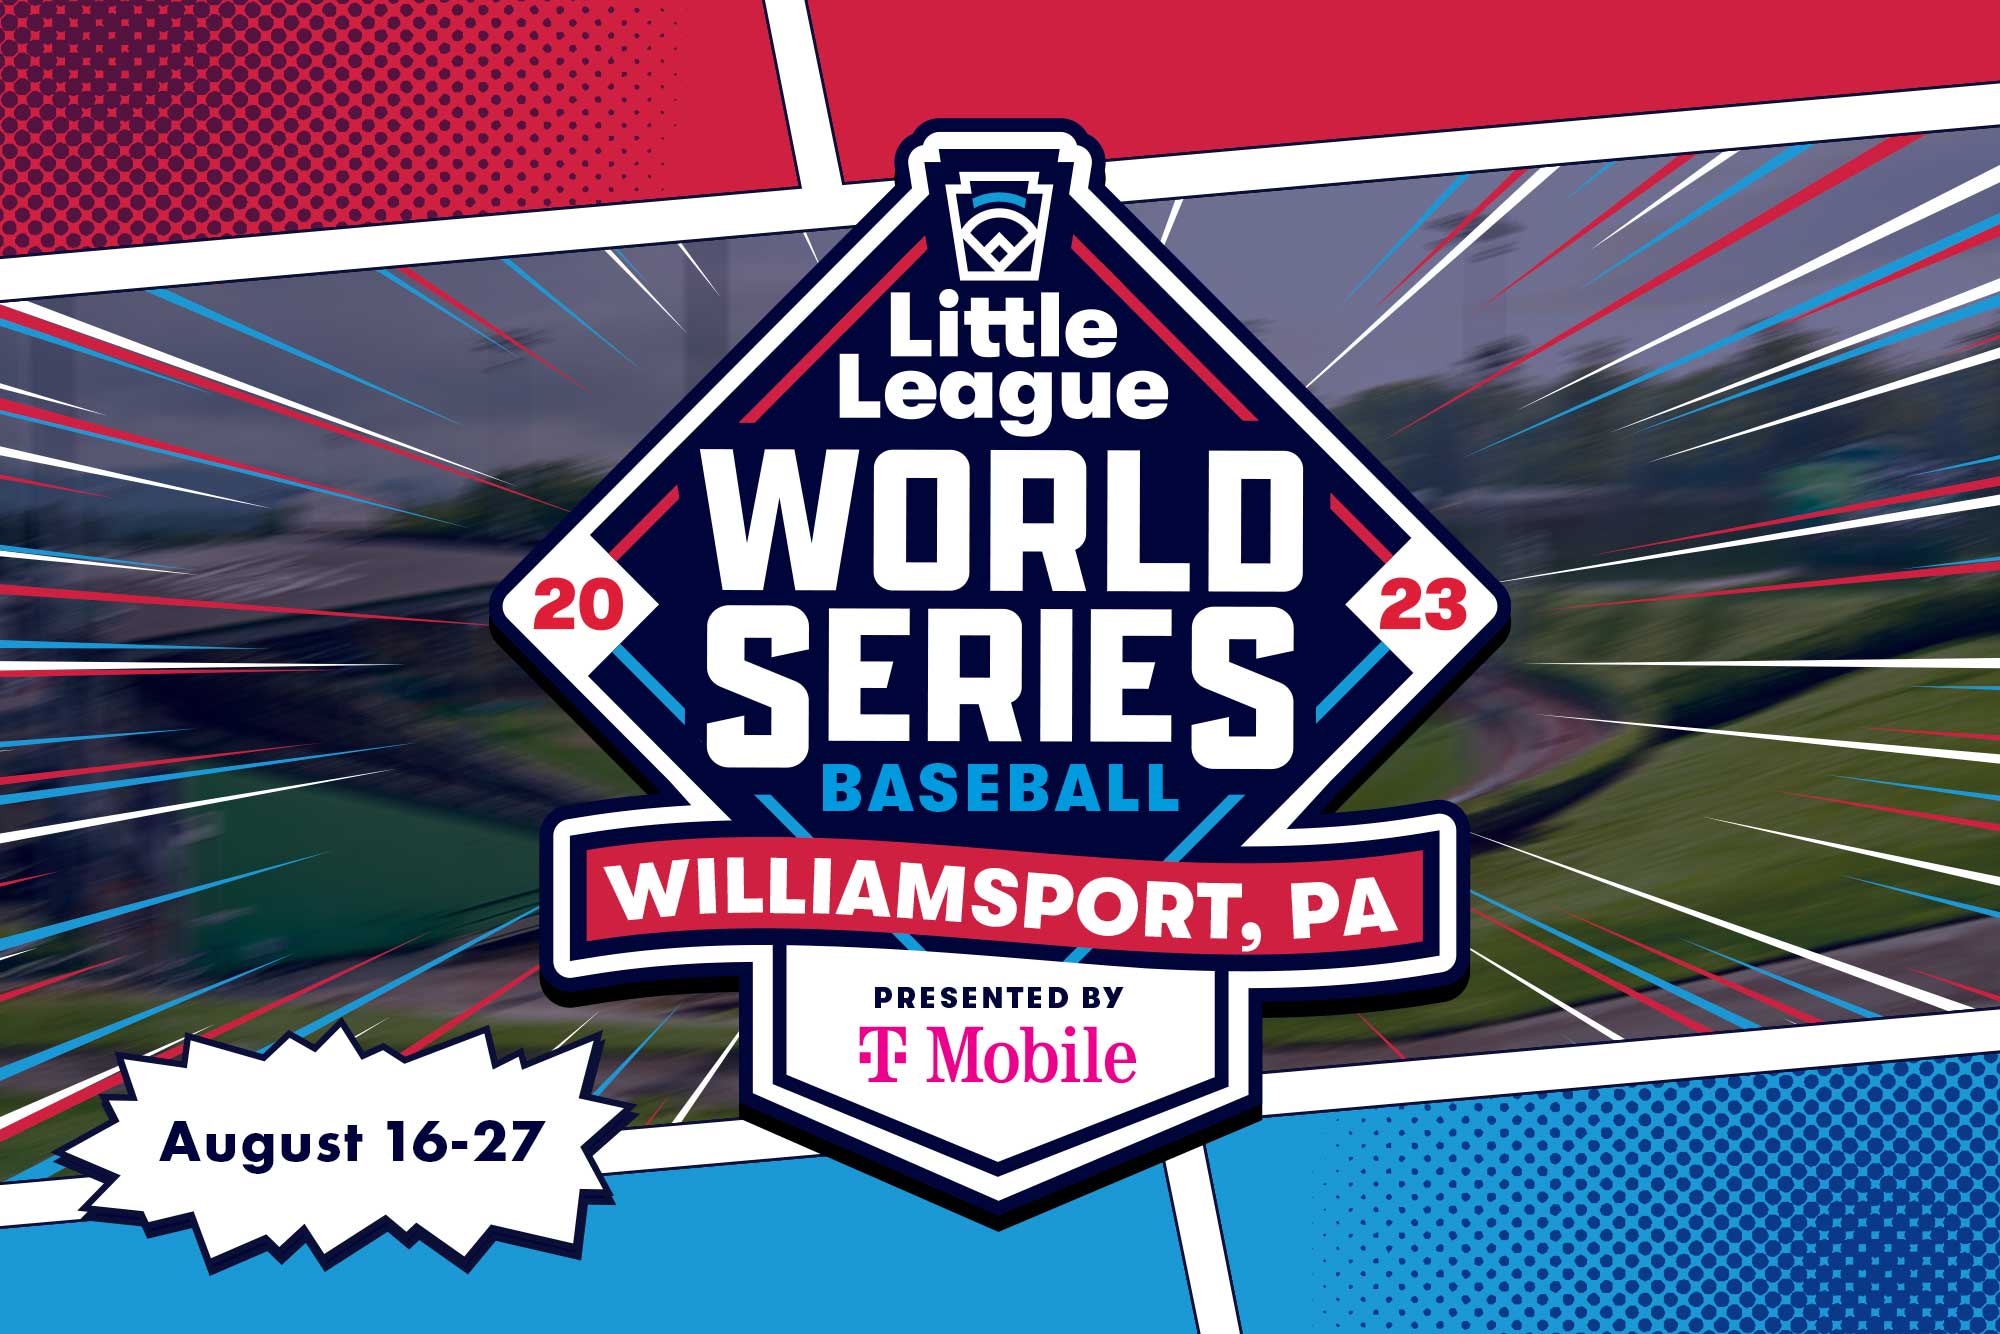 How to Watch Little League Baseball World Series on August 20